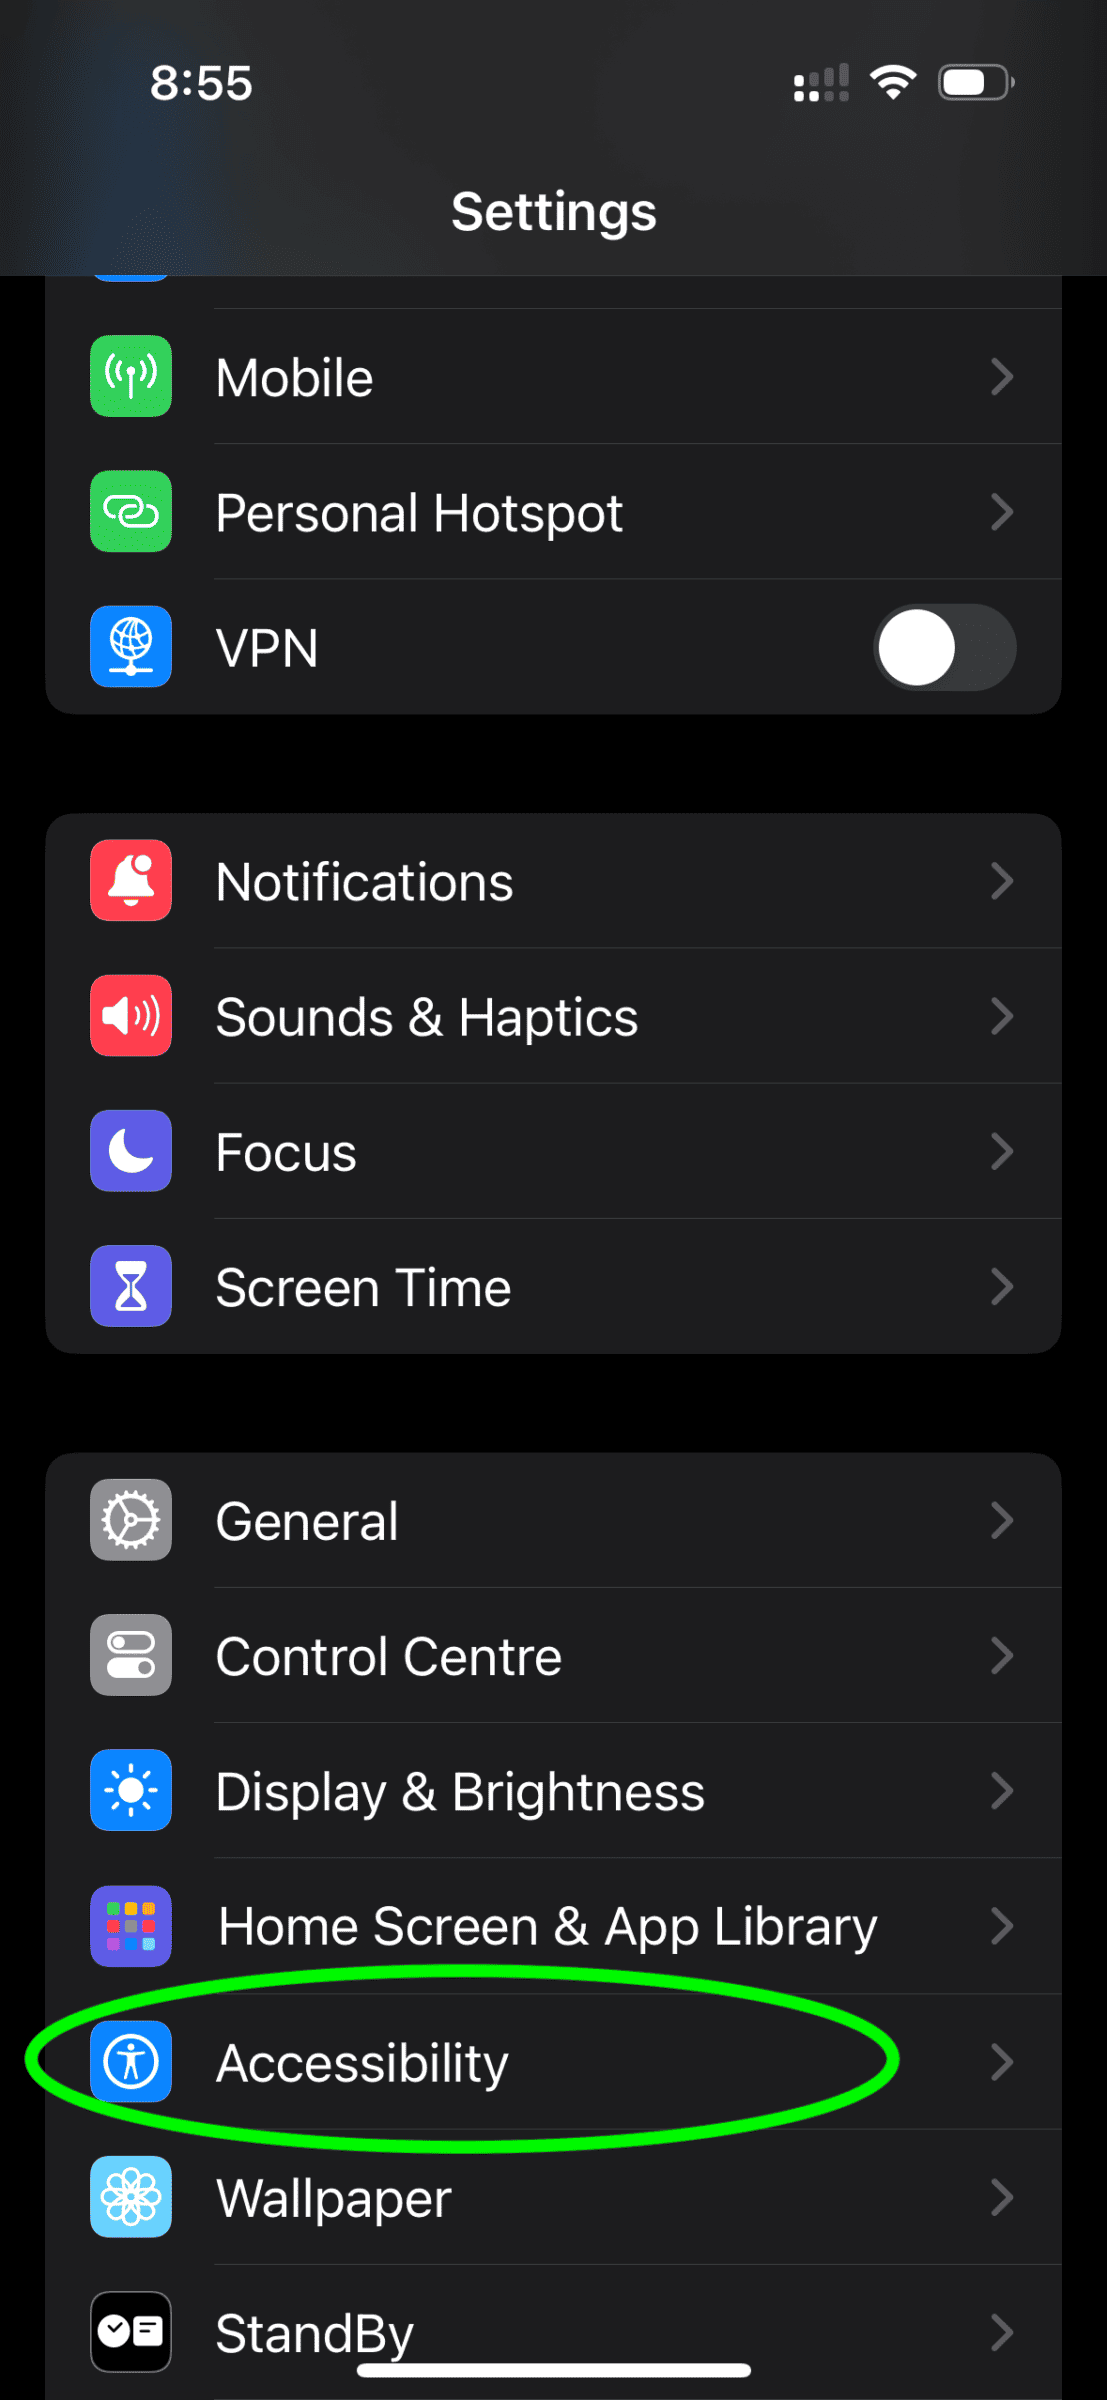 A screenshot of the settings app on an iPhone with the Accessibility menu item circled in green.